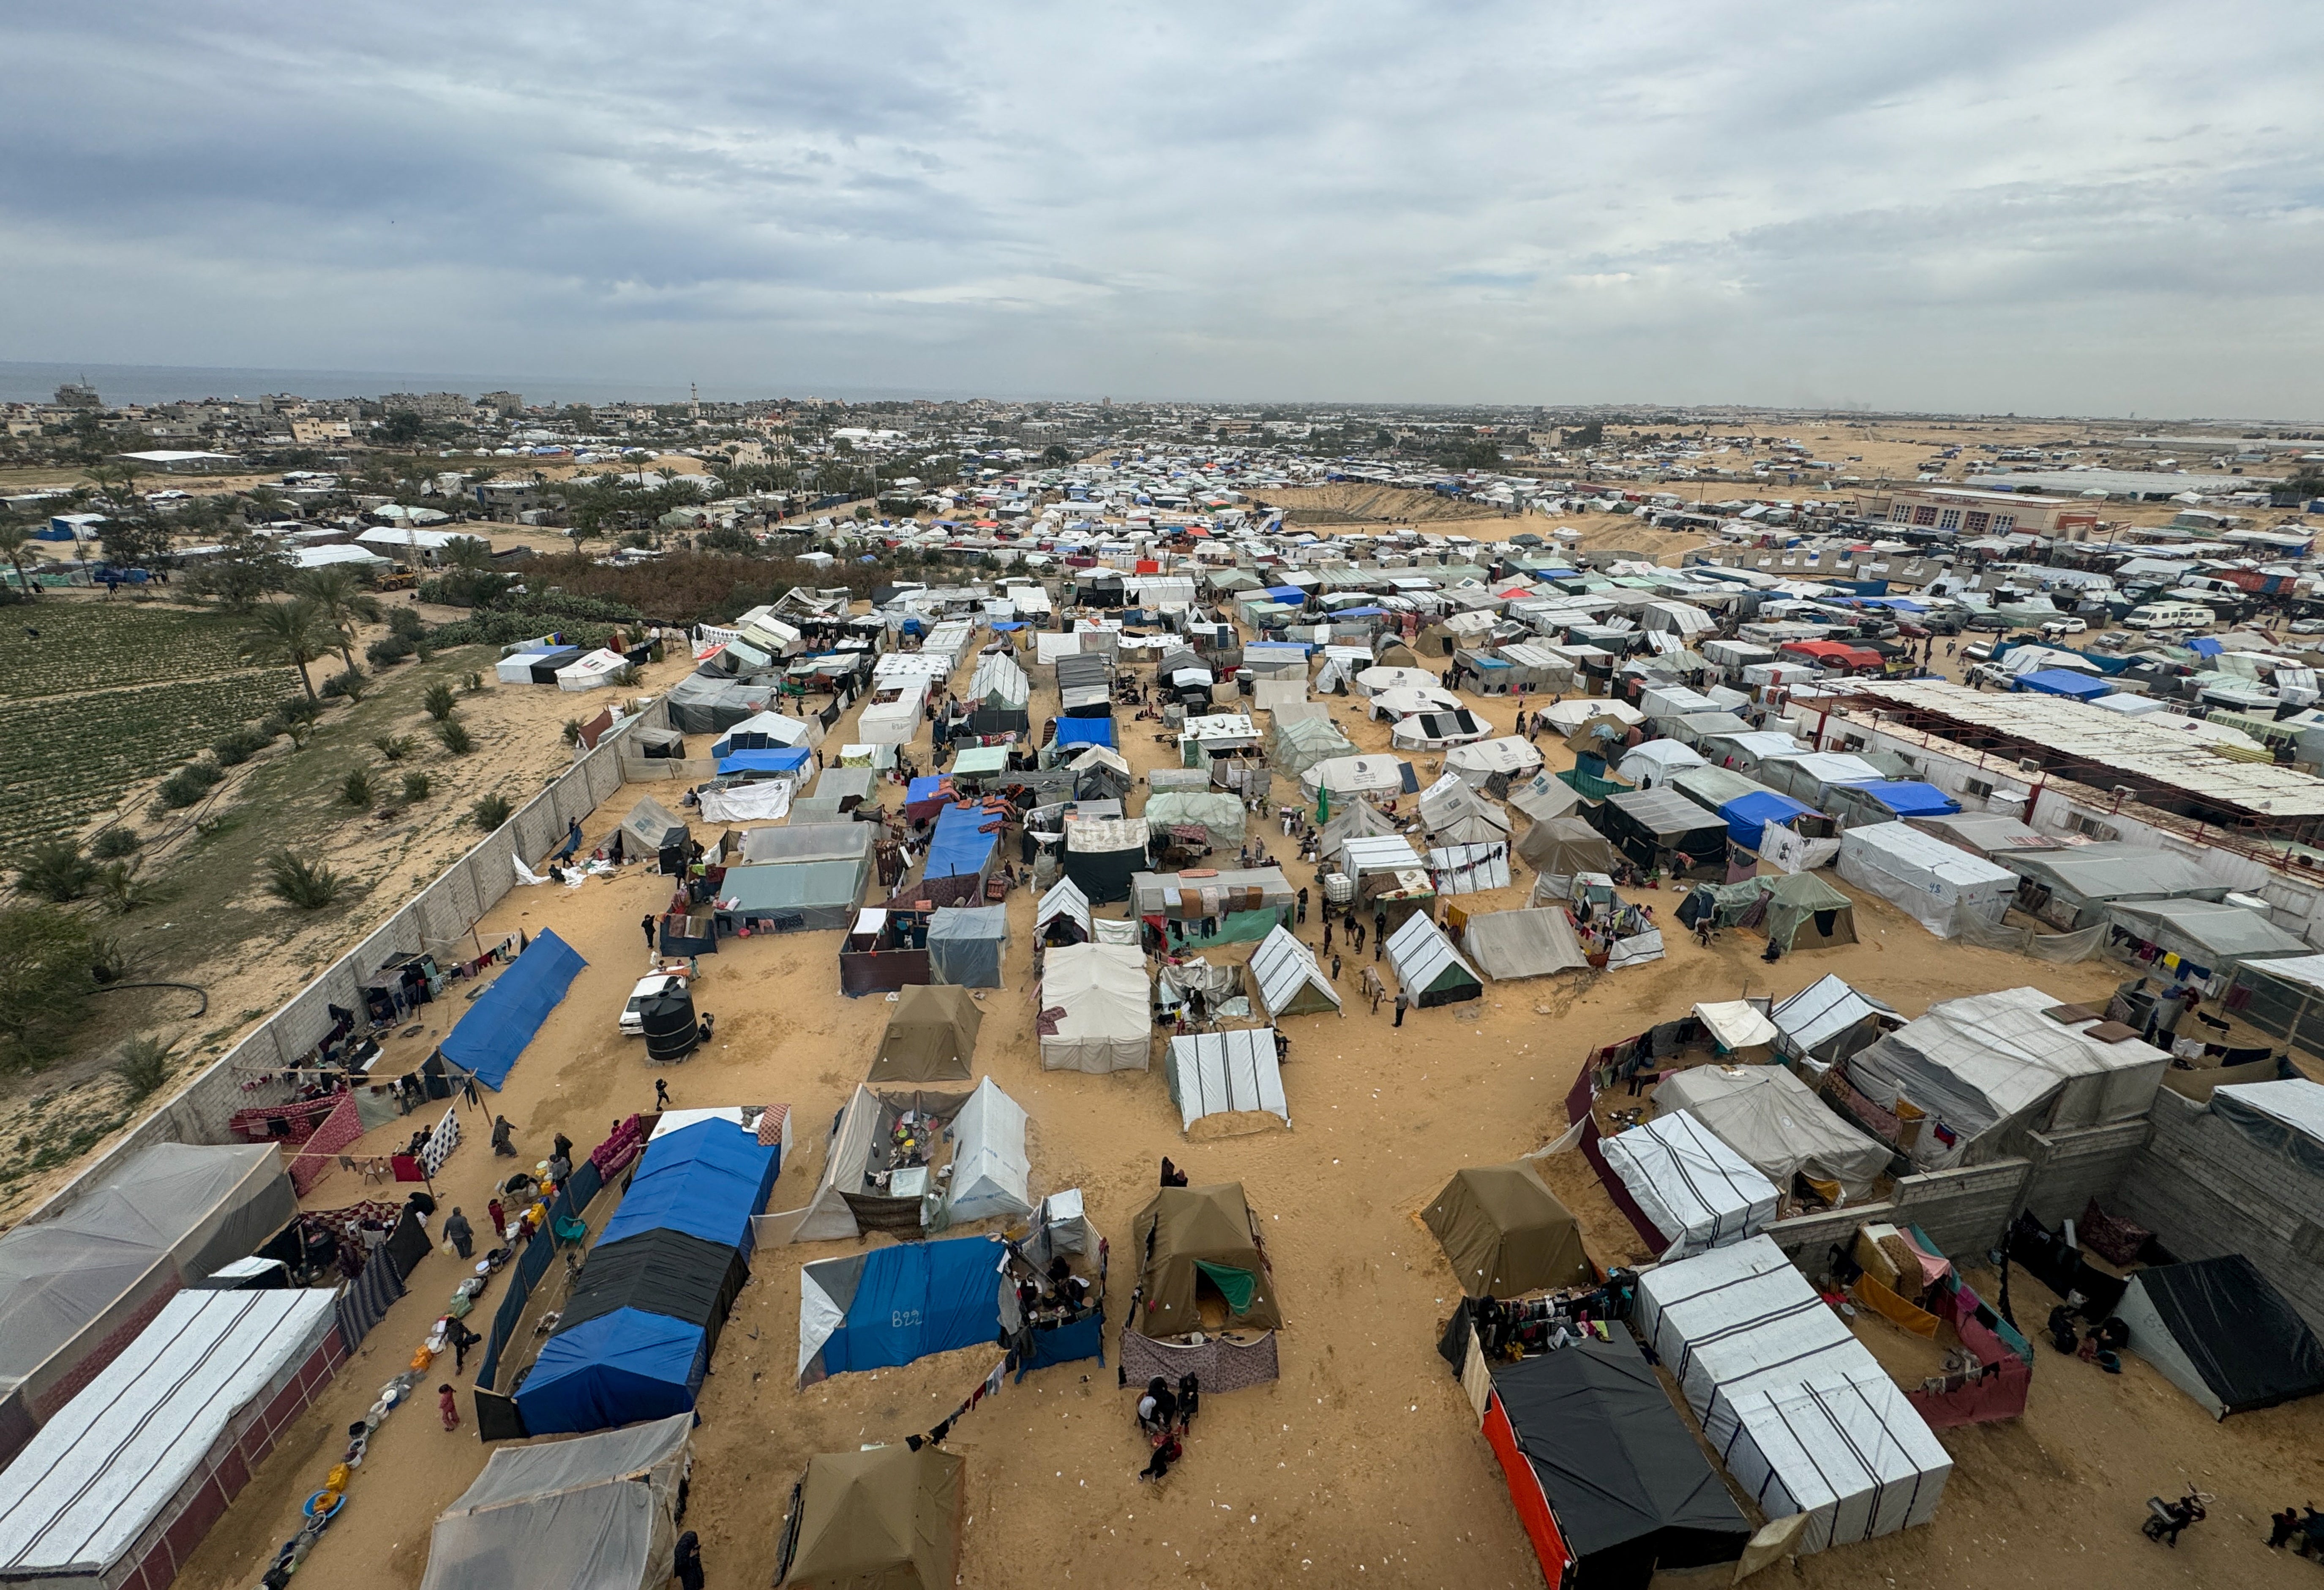 Displaced Palestinians who fled their houses due to Israeli strikes take shelter in a tent camp, in Rafah